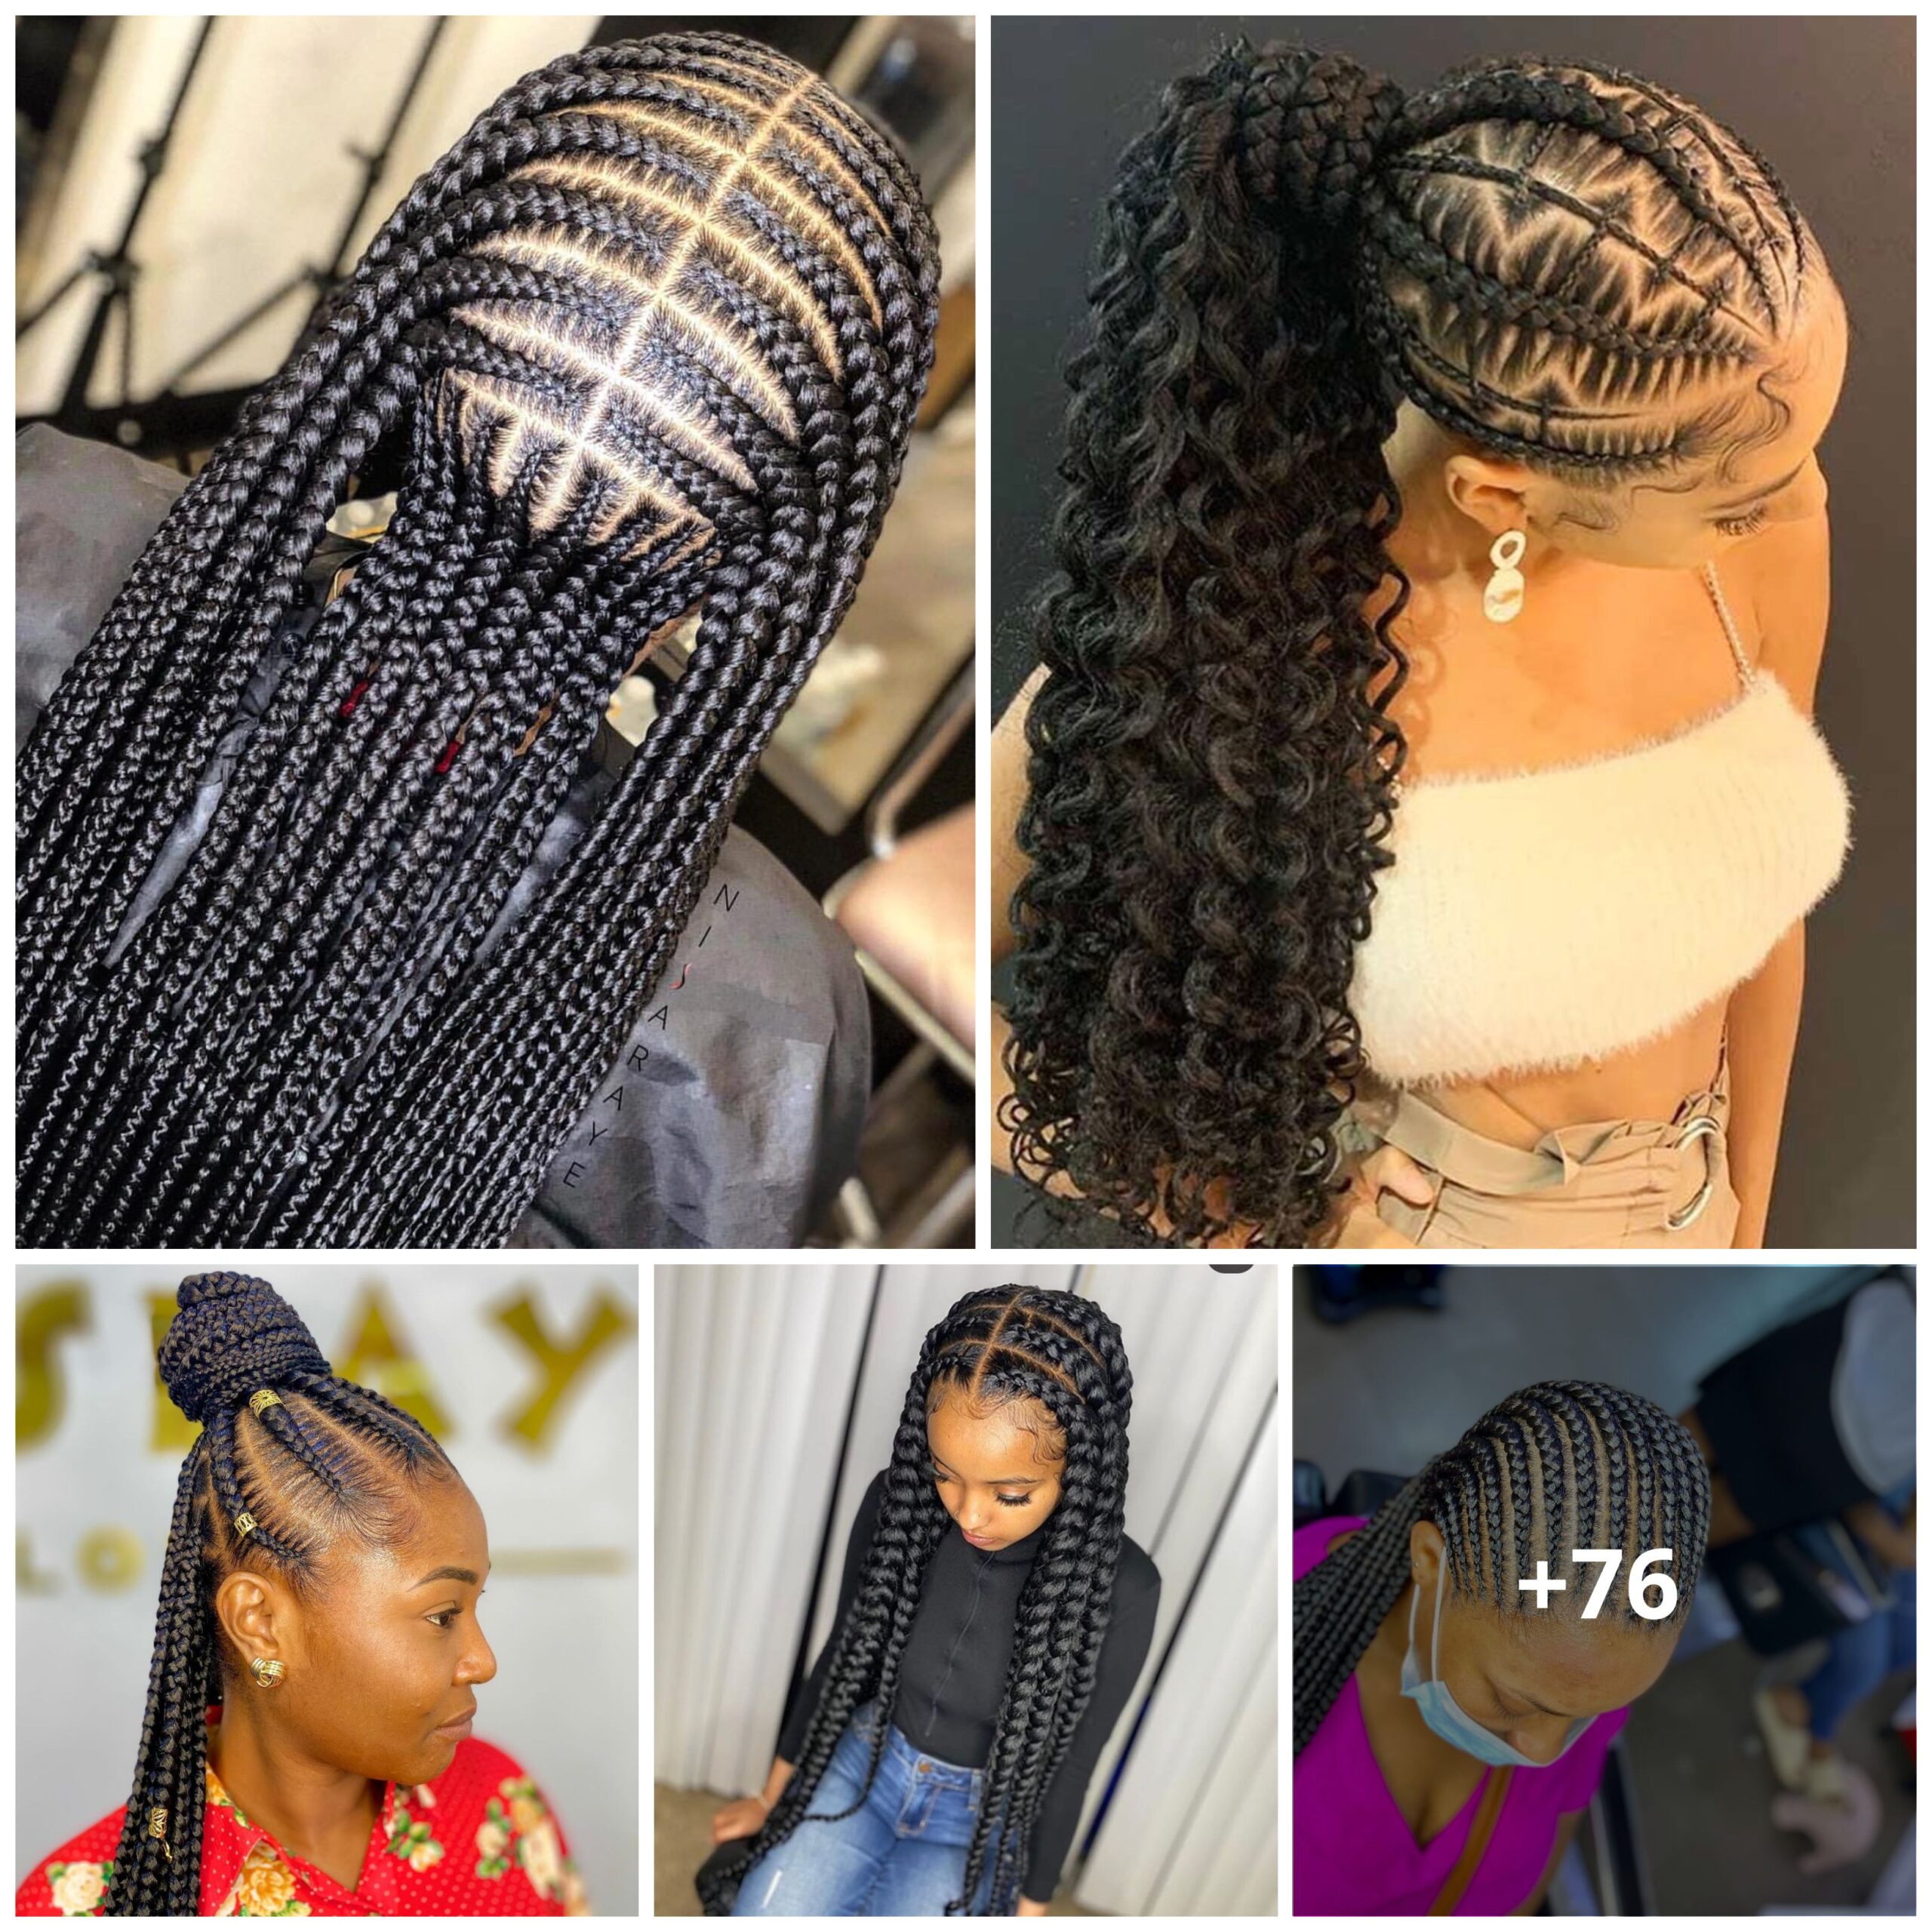 76 Braided Hairstyles That Are More and More Popular